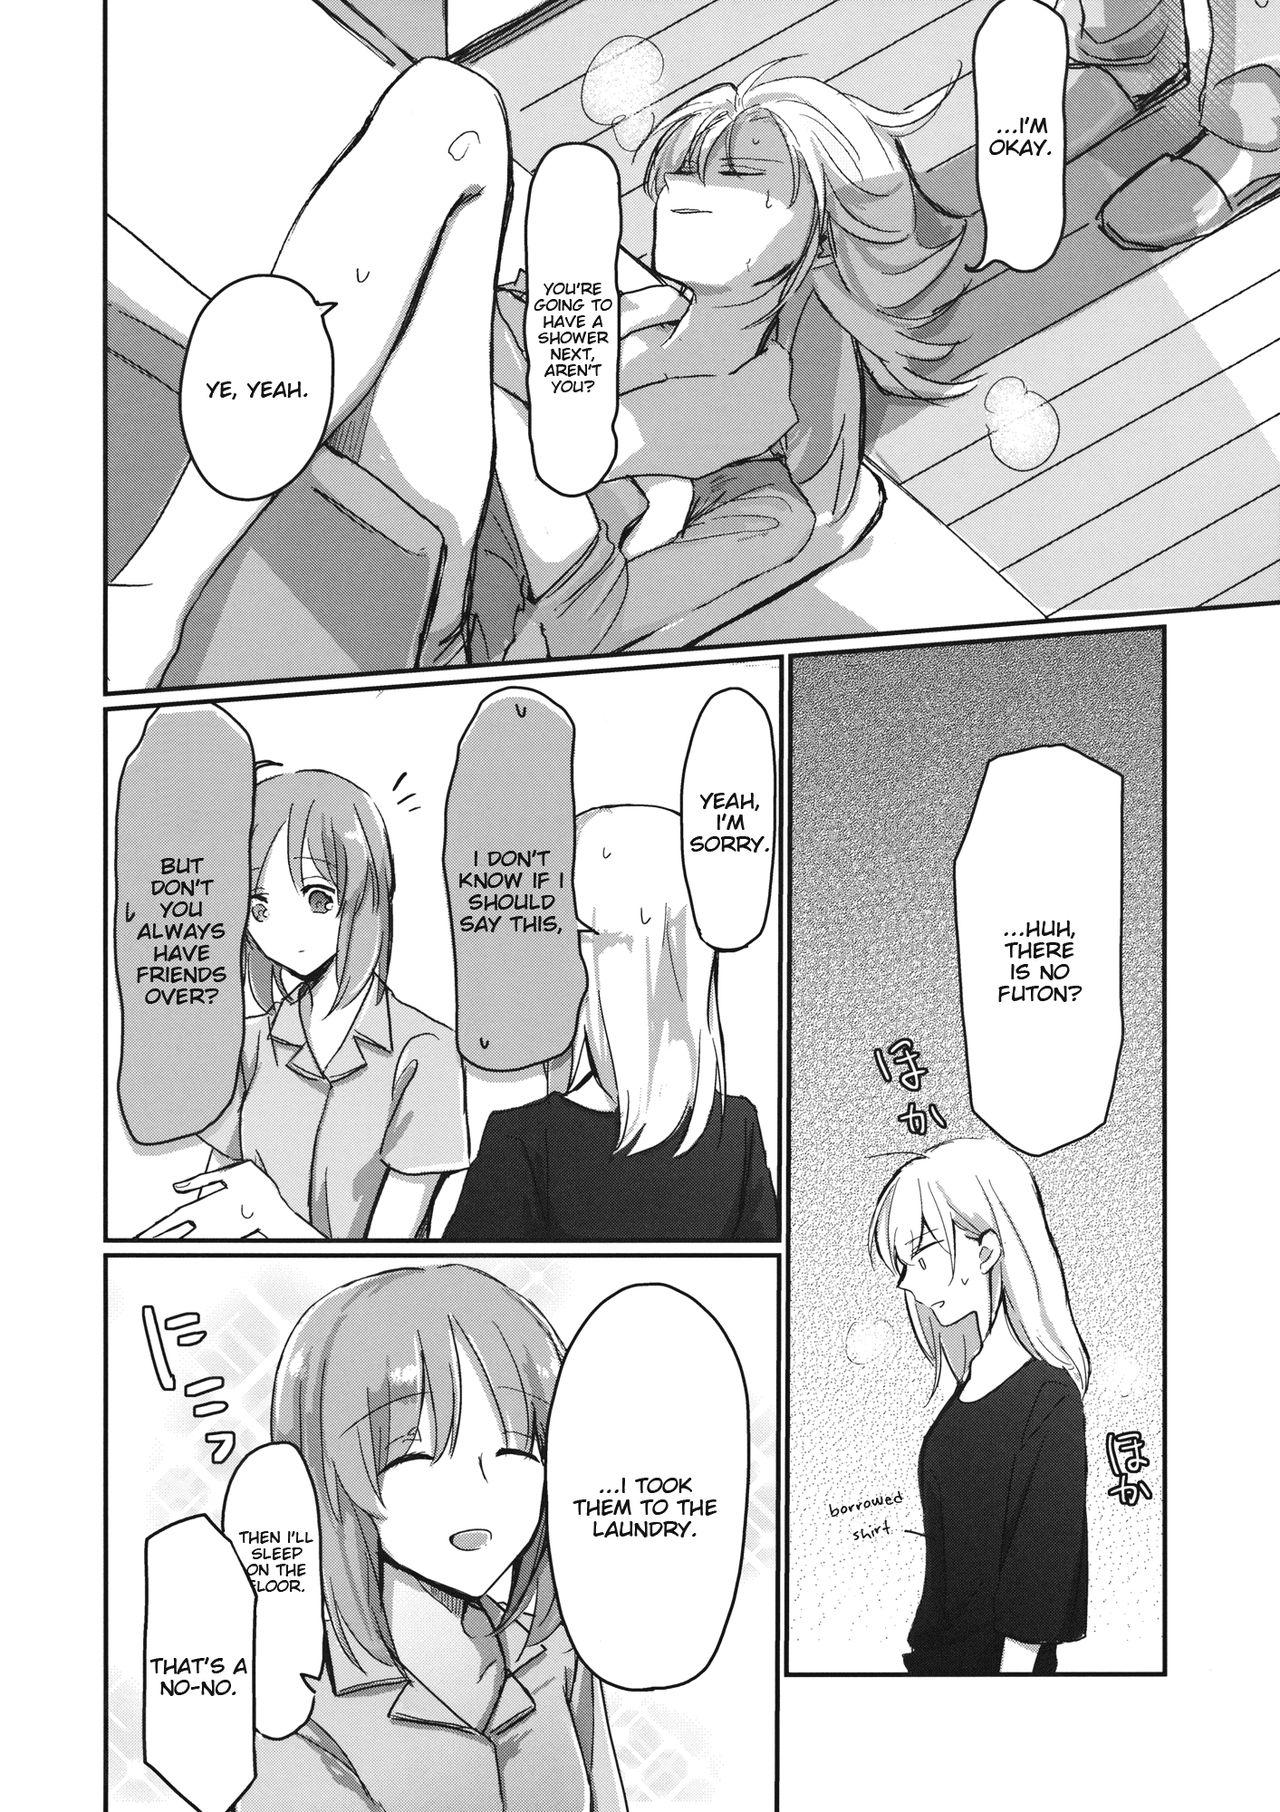 Teenage Porn for the first time - Girls und panzer Dildos - Page 7